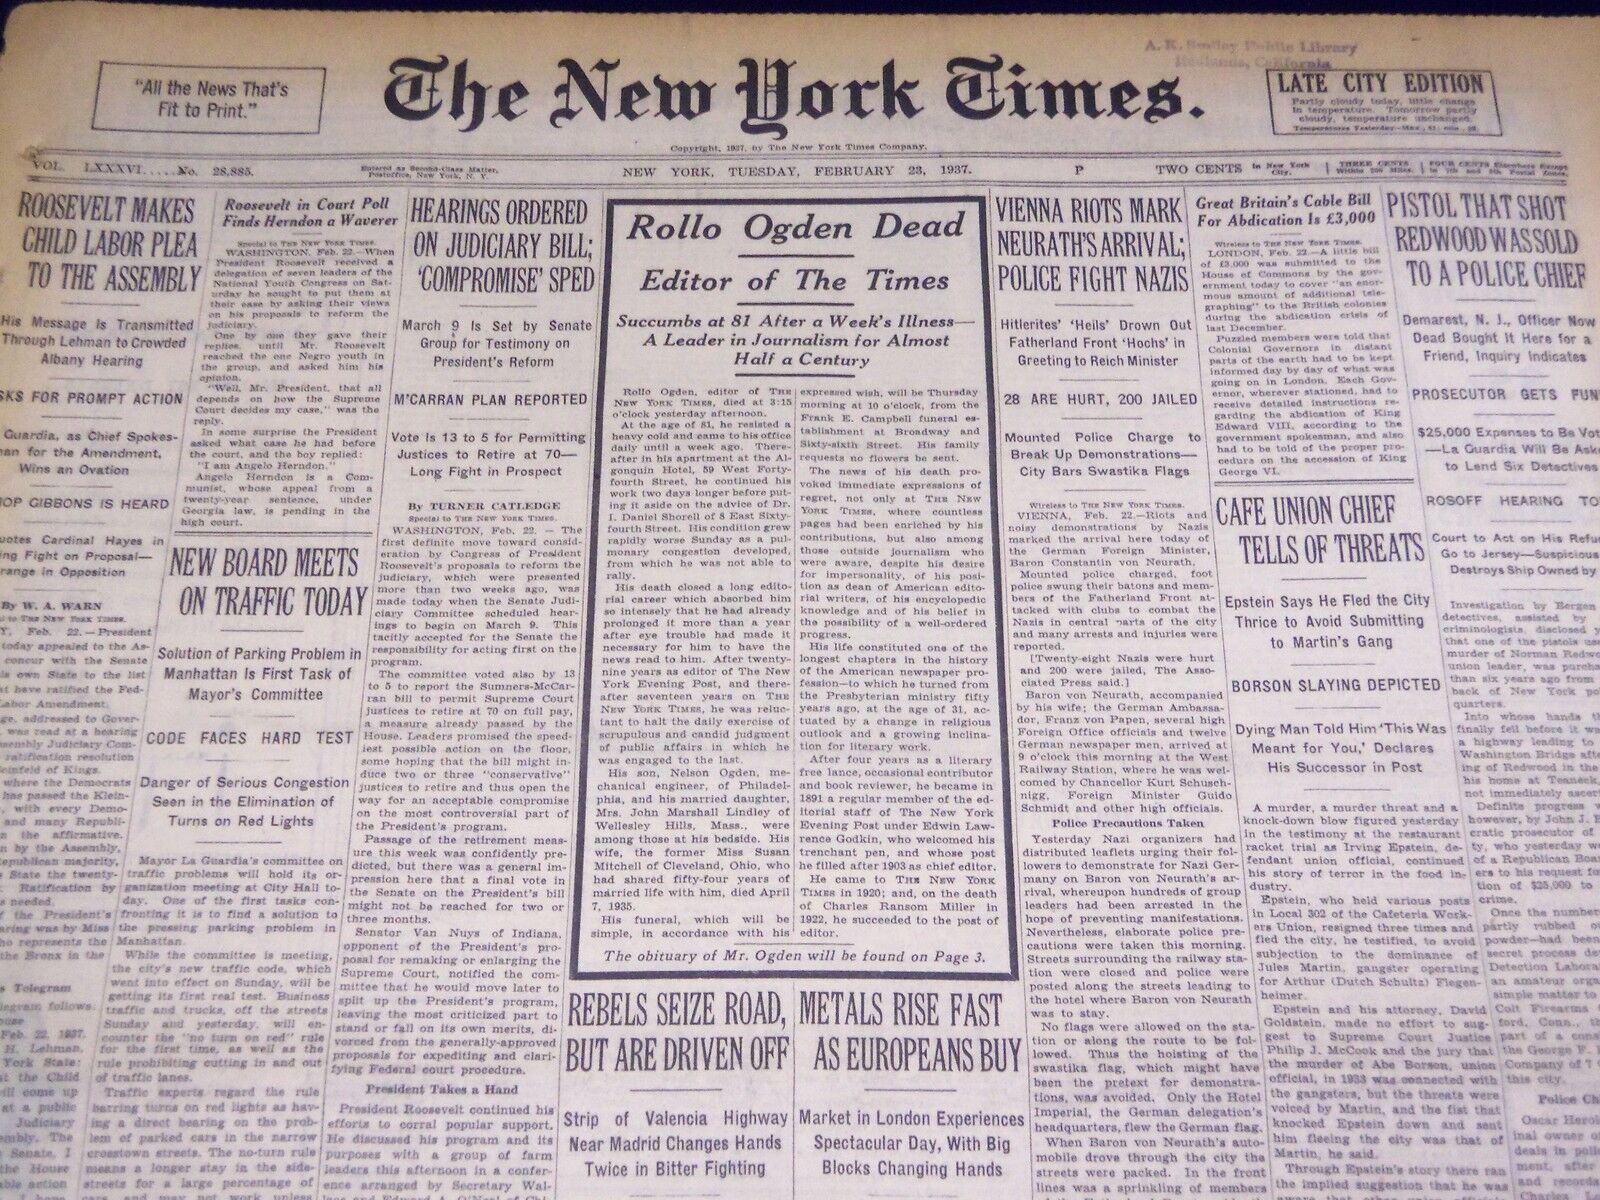 1937 FEB 23 NEW YORK TIMES - ROLLO OGDEN DEAD EDITOR OF THE TIMES - NT 1298